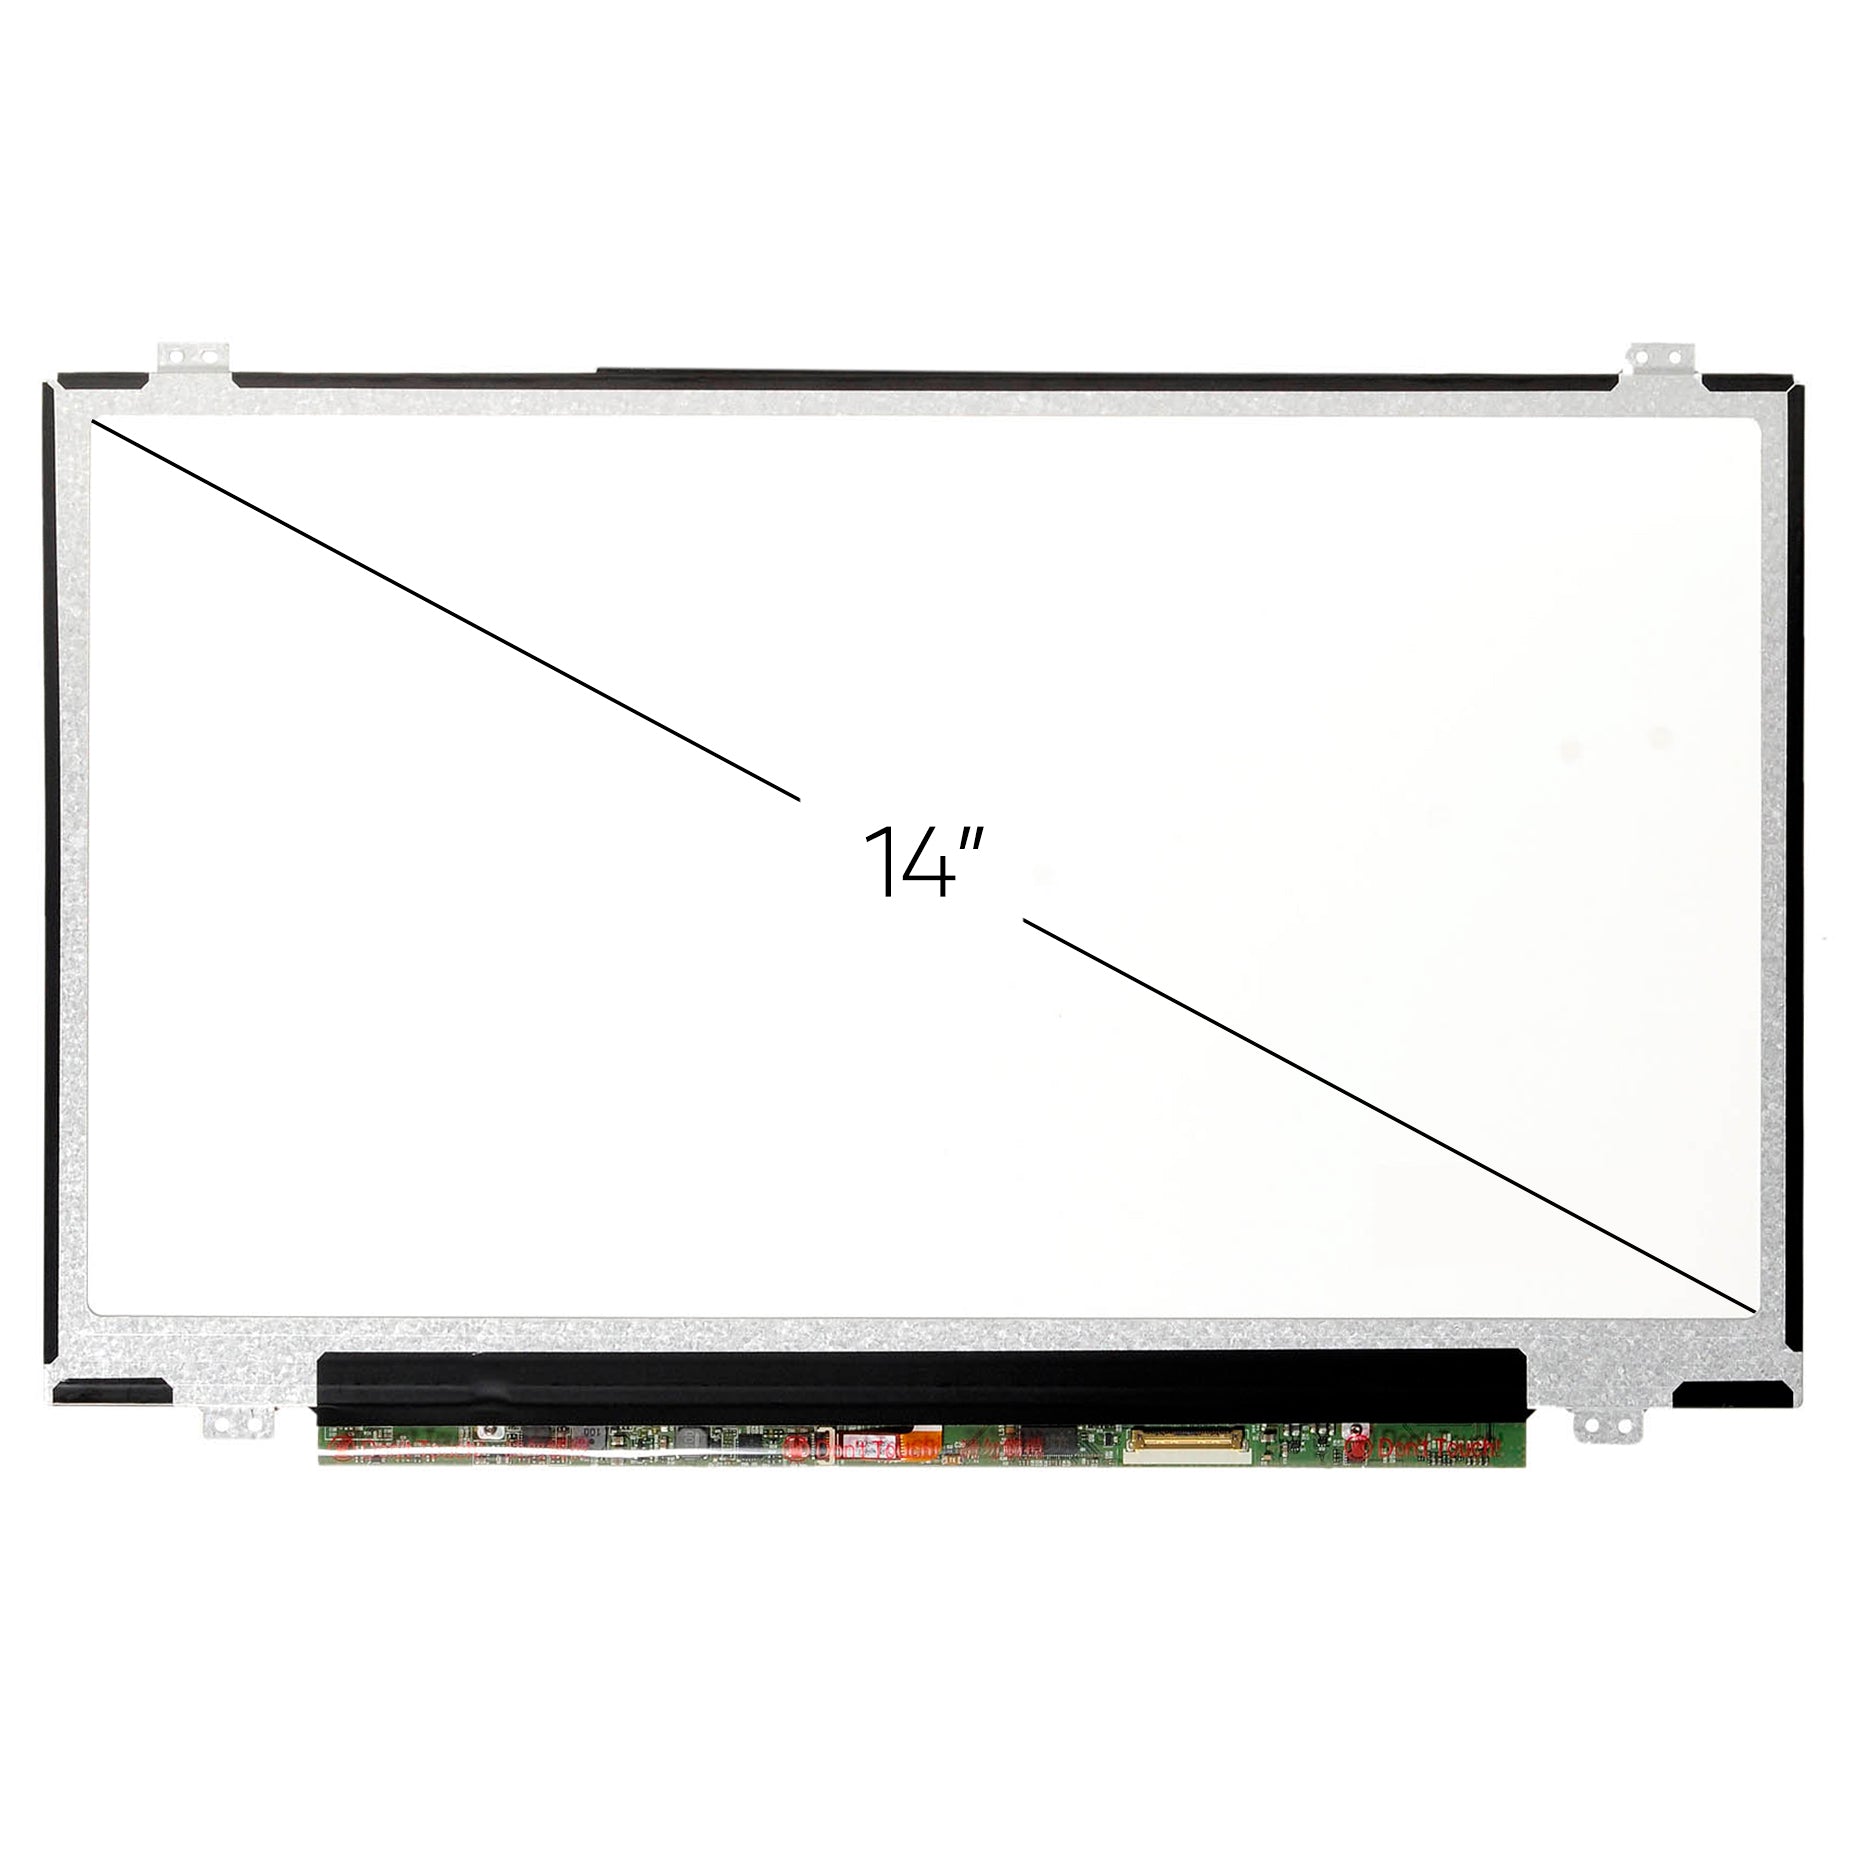 Screen Replacement for Lenovo Thinkpad T440S 20AQ006HUS FHD 1920x1080 IPS Matte LCD LED Display